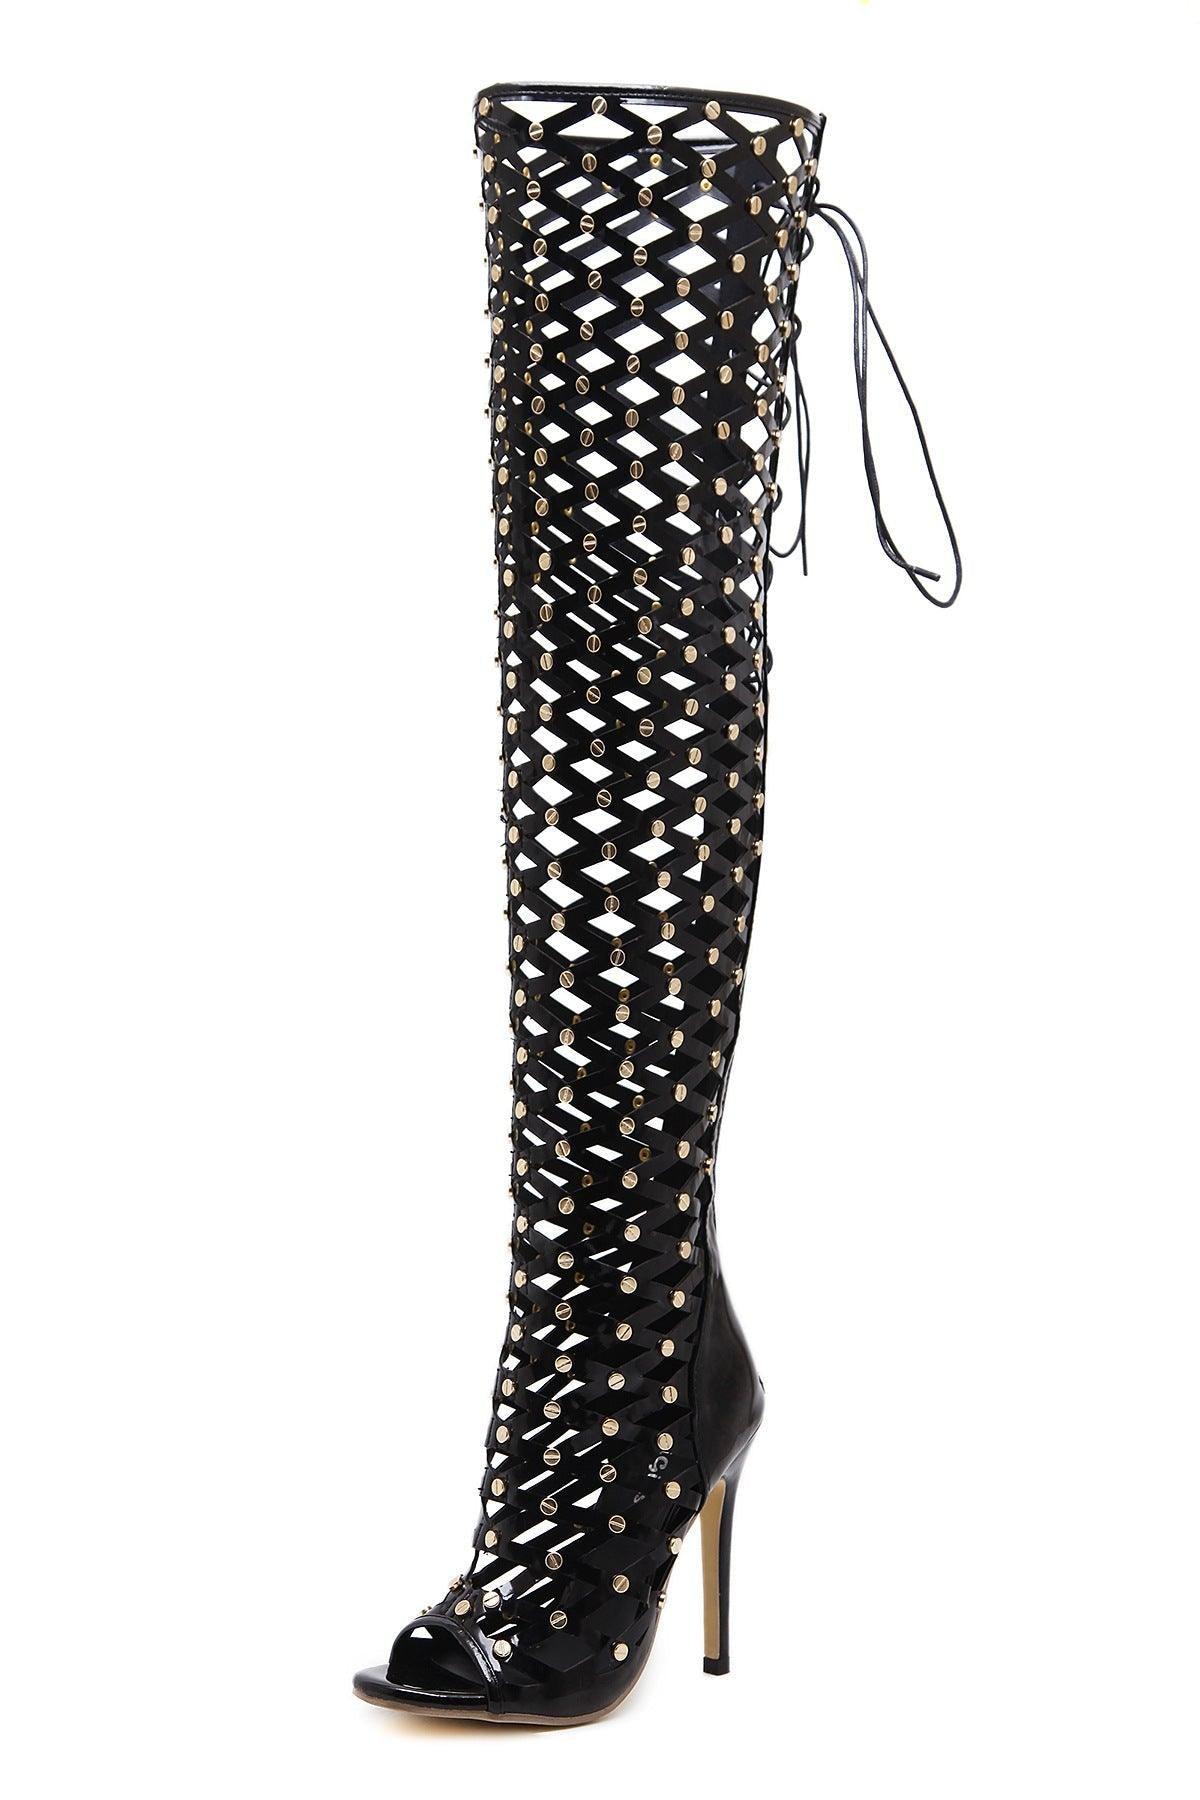 High Heels Stiletto Rivets Over the Knee Boots - ForVanity boots, women's shoes Shoes